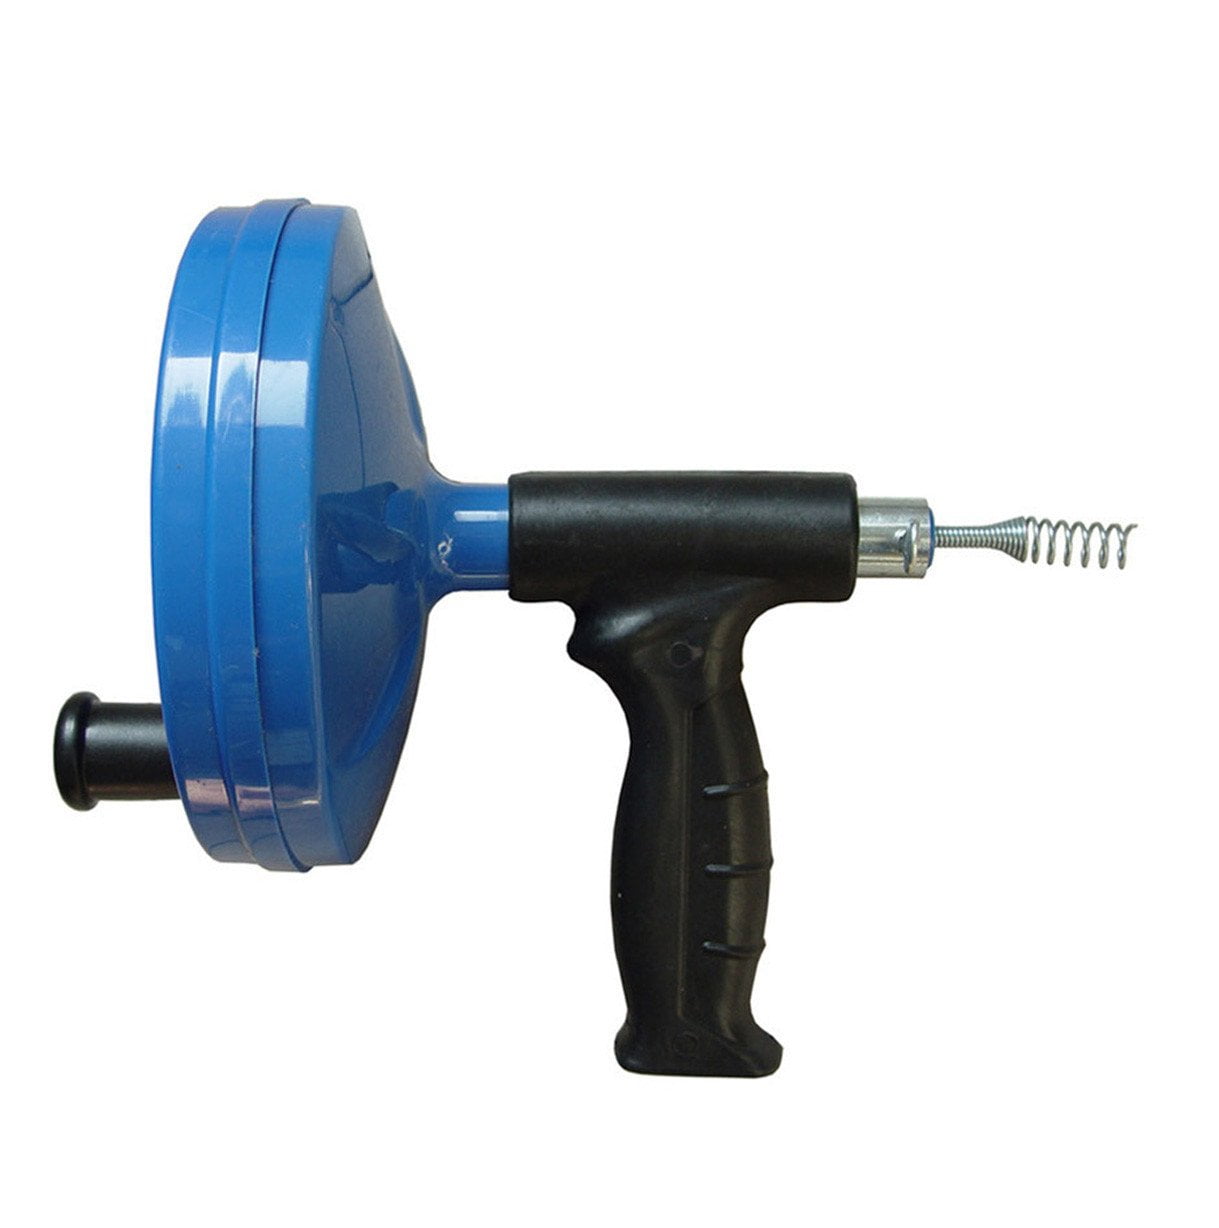 Hand Crank Or Drill Operated Powered Plumbing Drain Cleaner Snake Cable Tool 